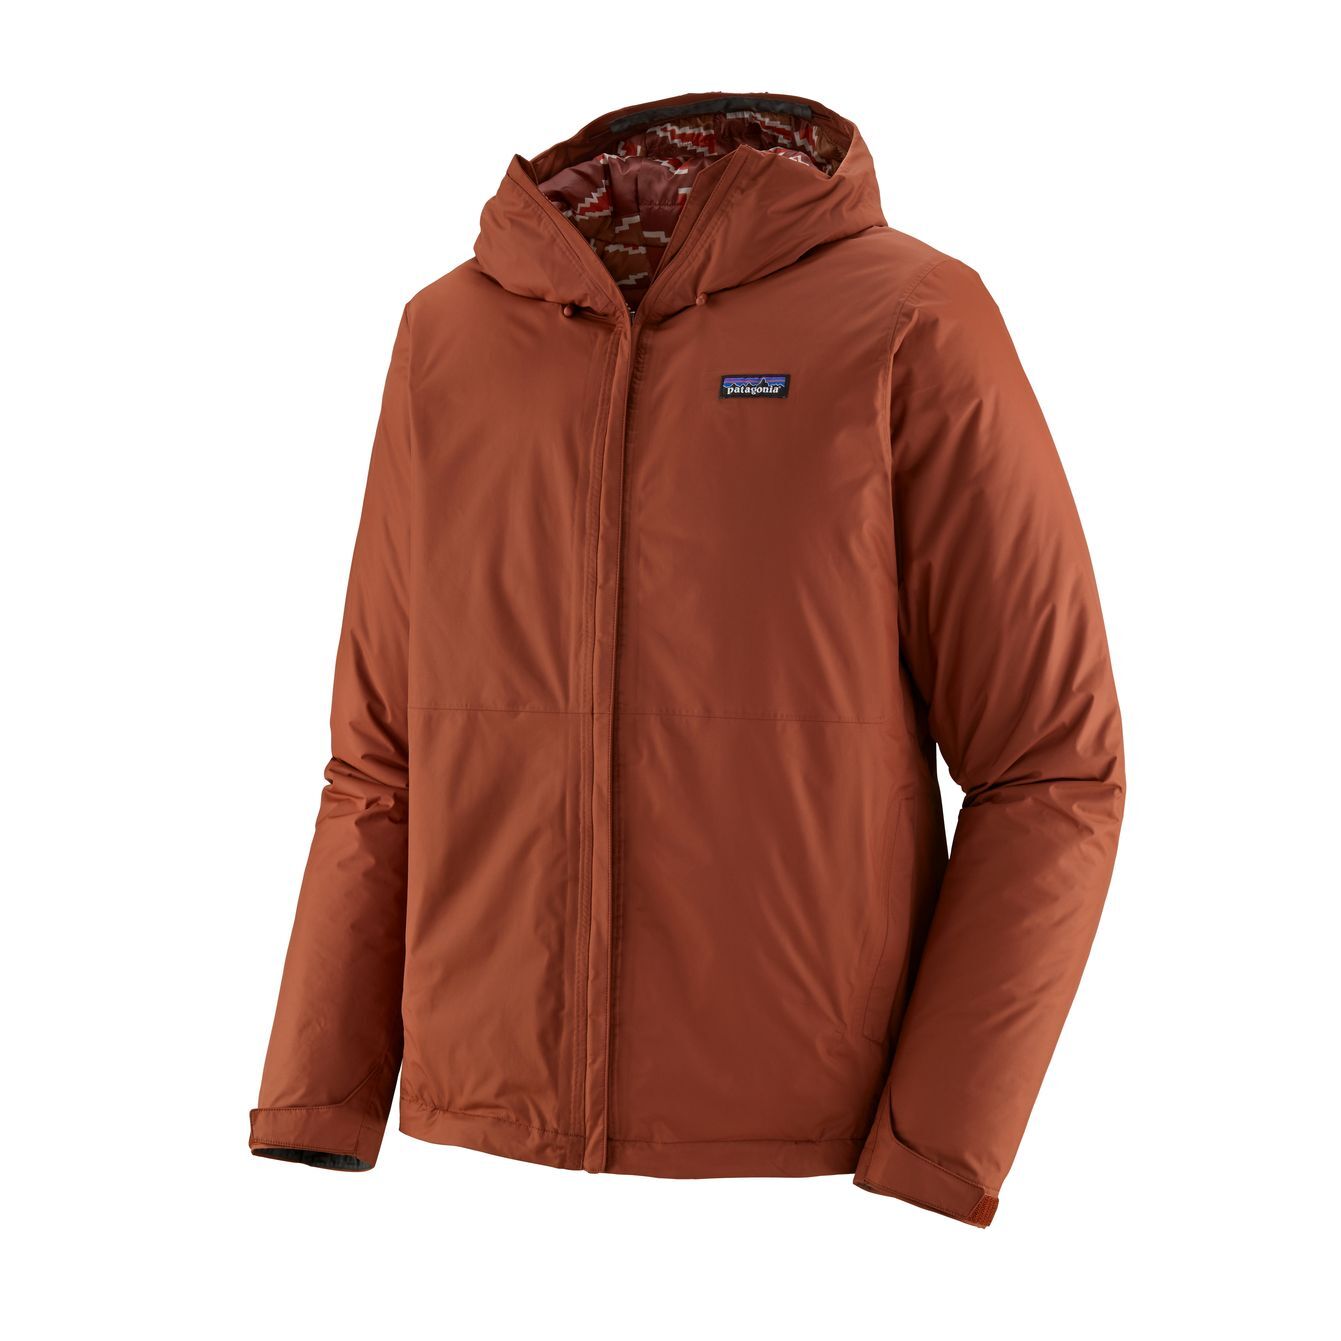 Patagonia Insulated Torrentshell Jacket - Chaqueta impermeable - Hombre